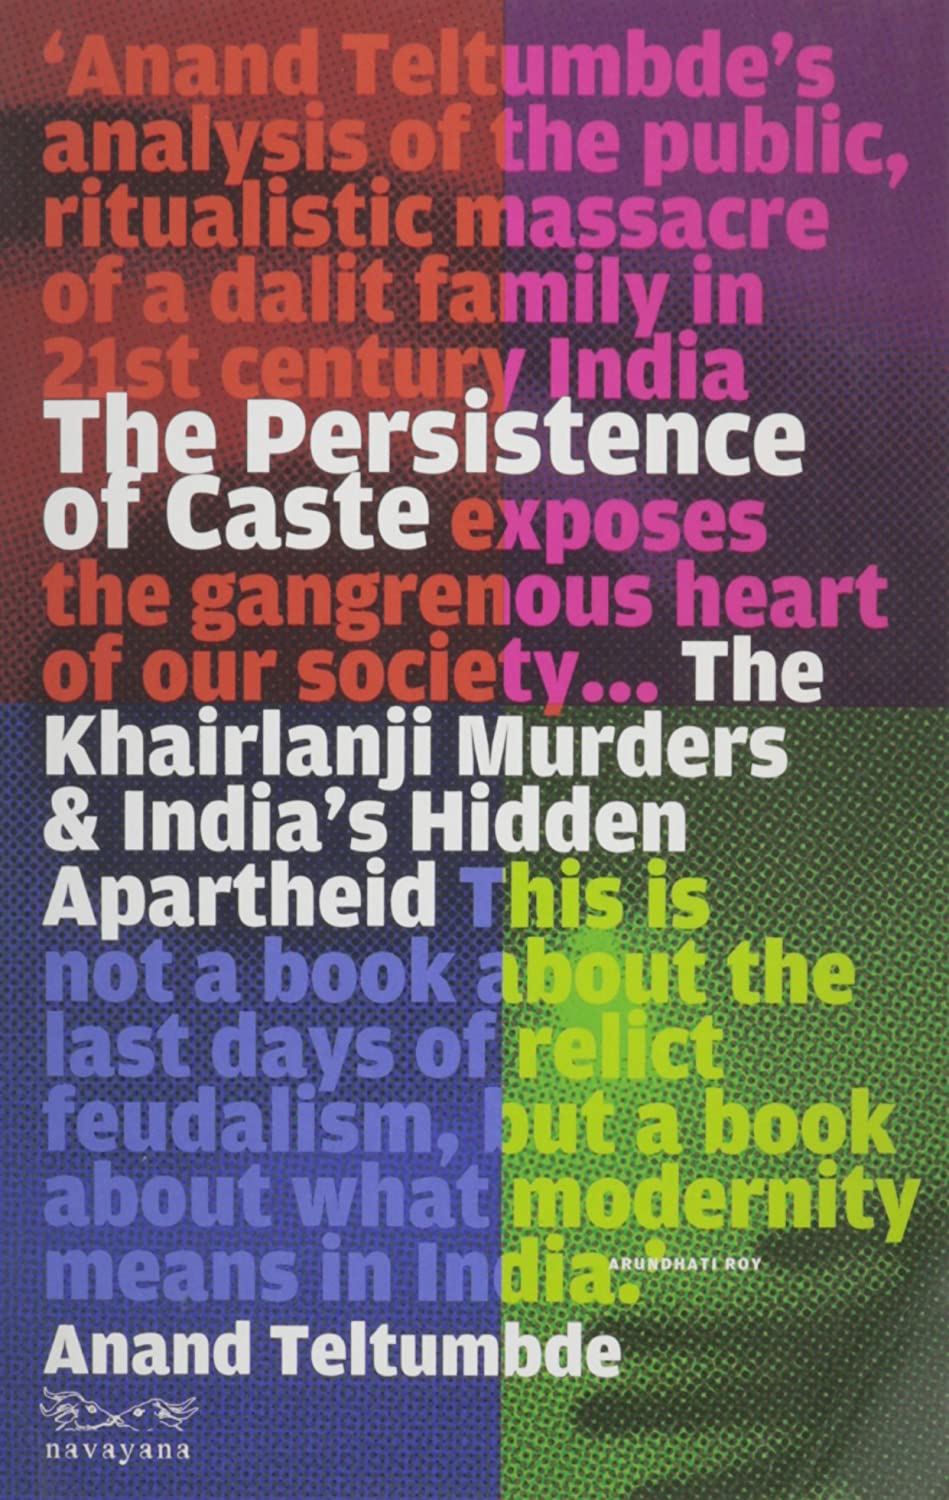 Anand Teltumbde: The Persistence of Caste (2010, Navayana)